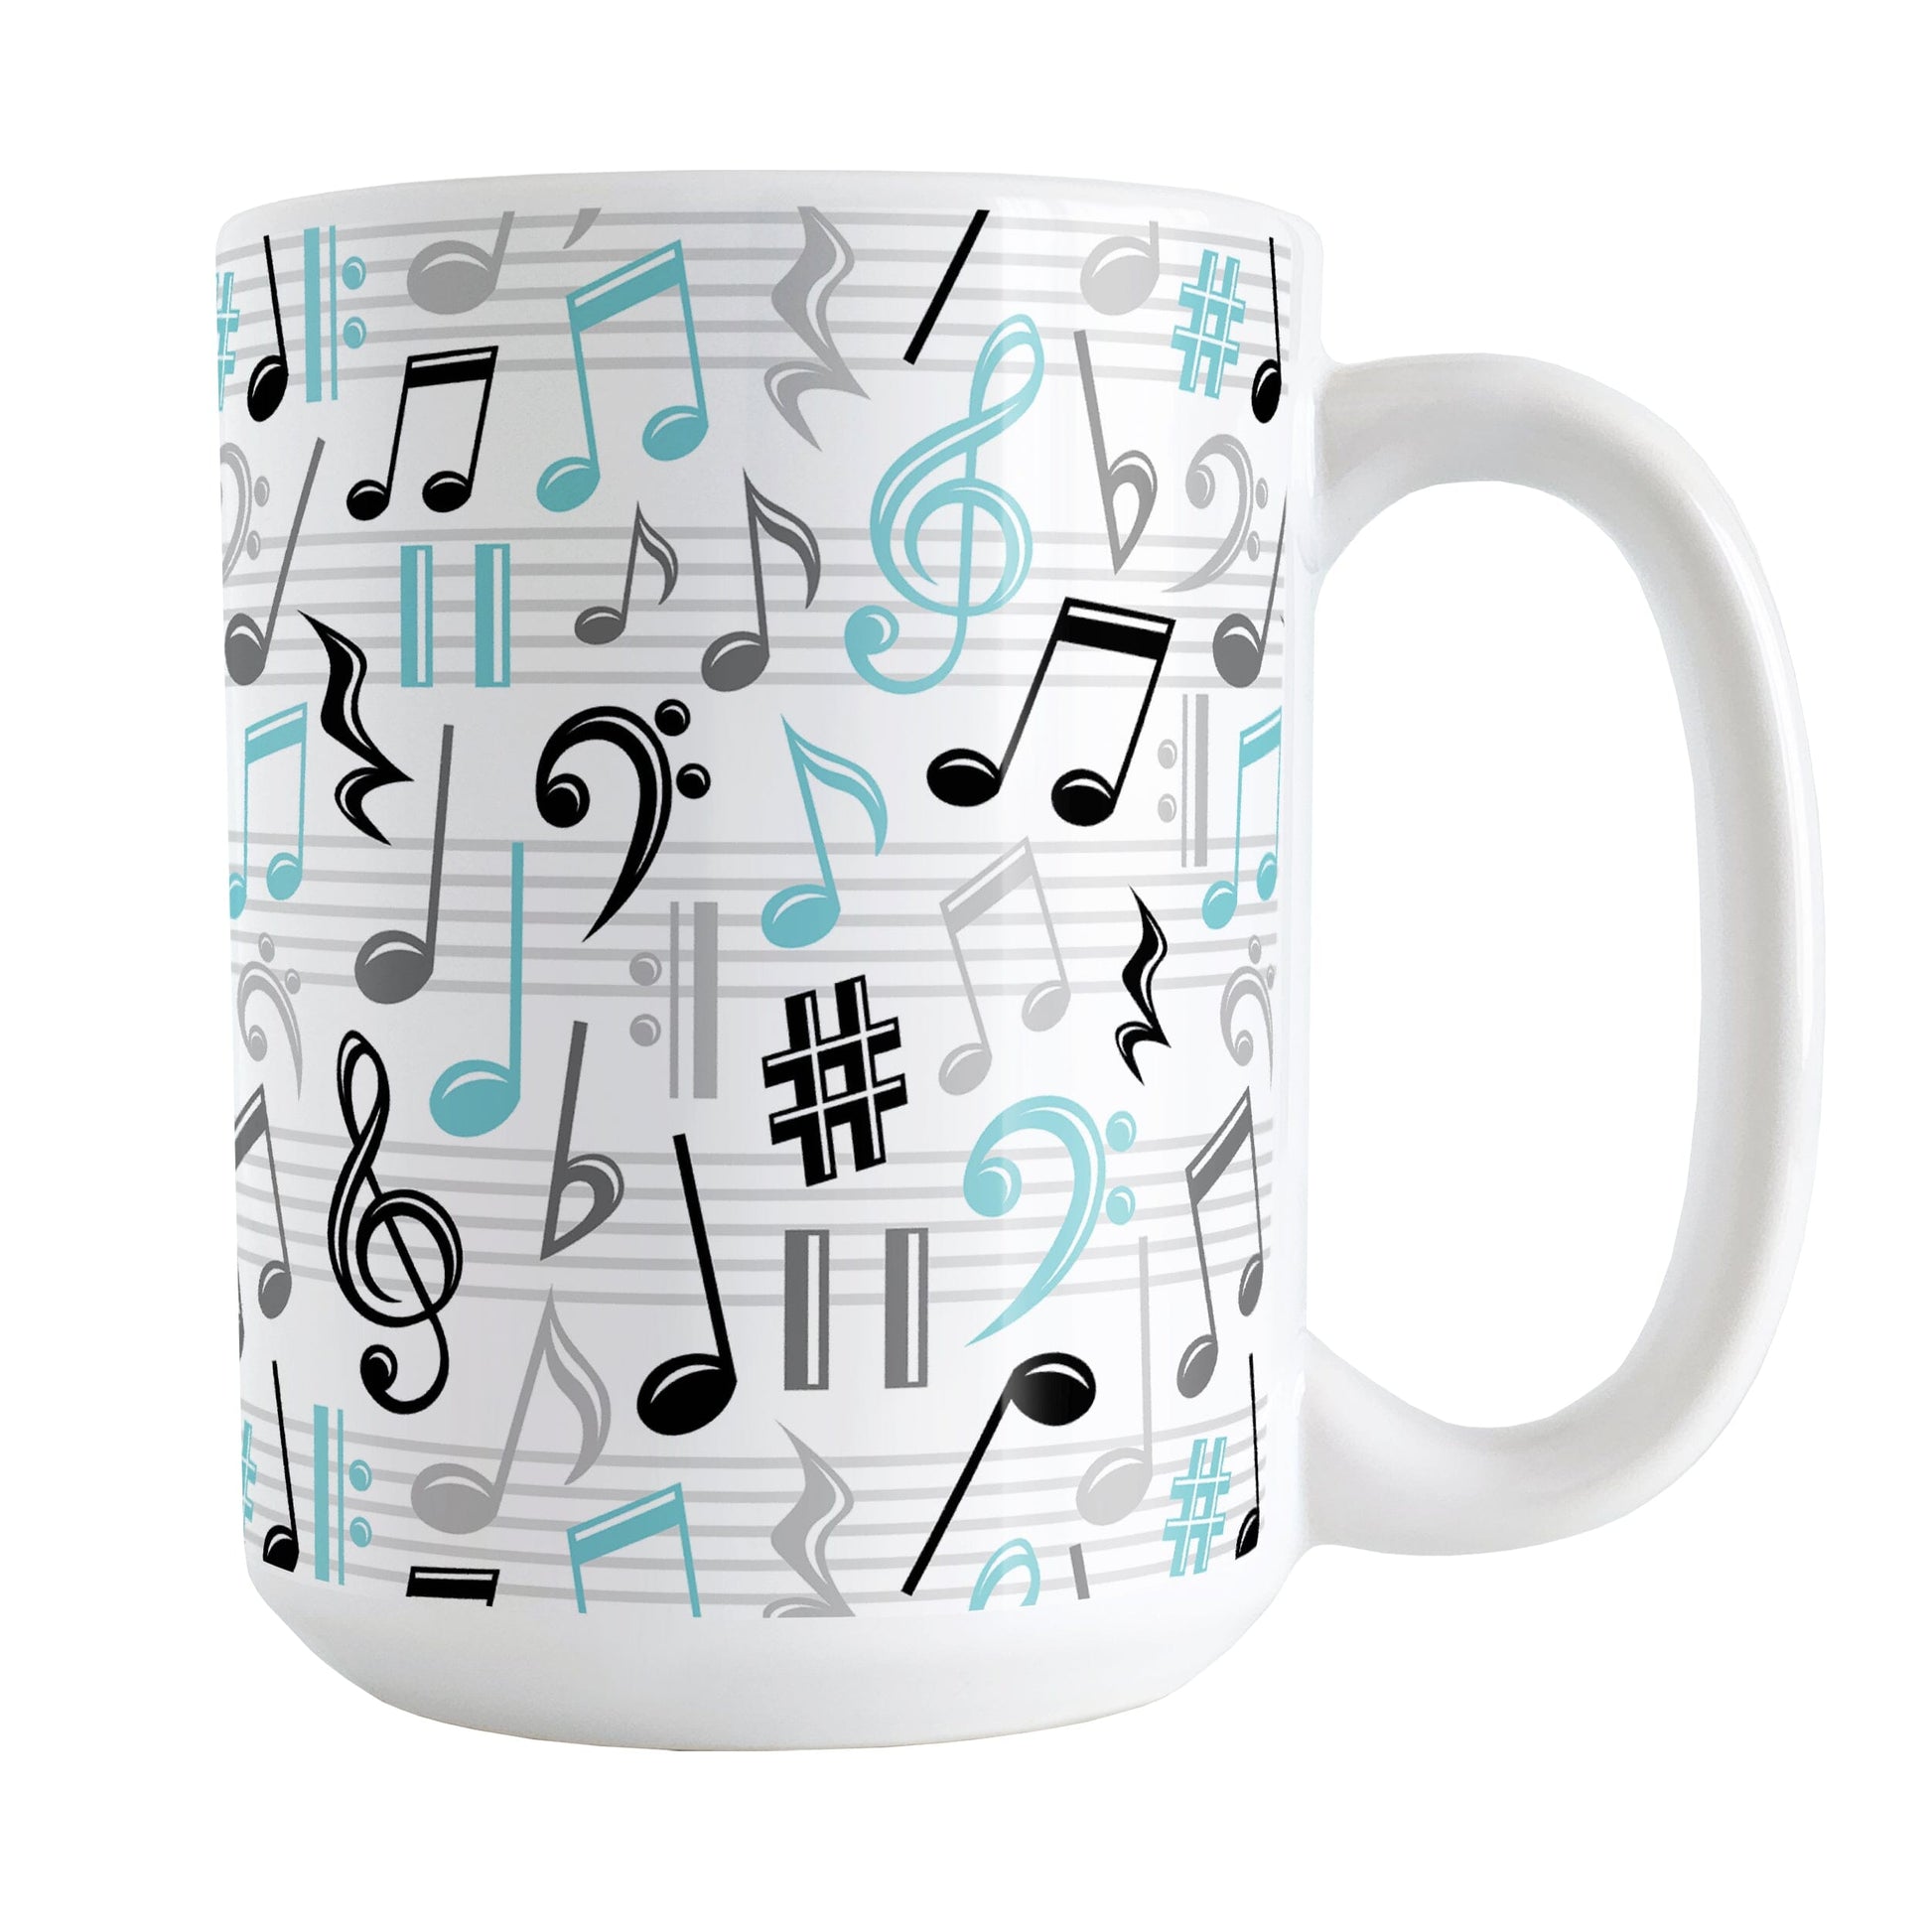 Turquoise Music Notes Pattern Mug (15oz) at Amy's Coffee Mugs. A ceramic coffee mug designed with music notes and symbols in turquoise, black, and gray in a pattern that wraps around the mug to the handle.